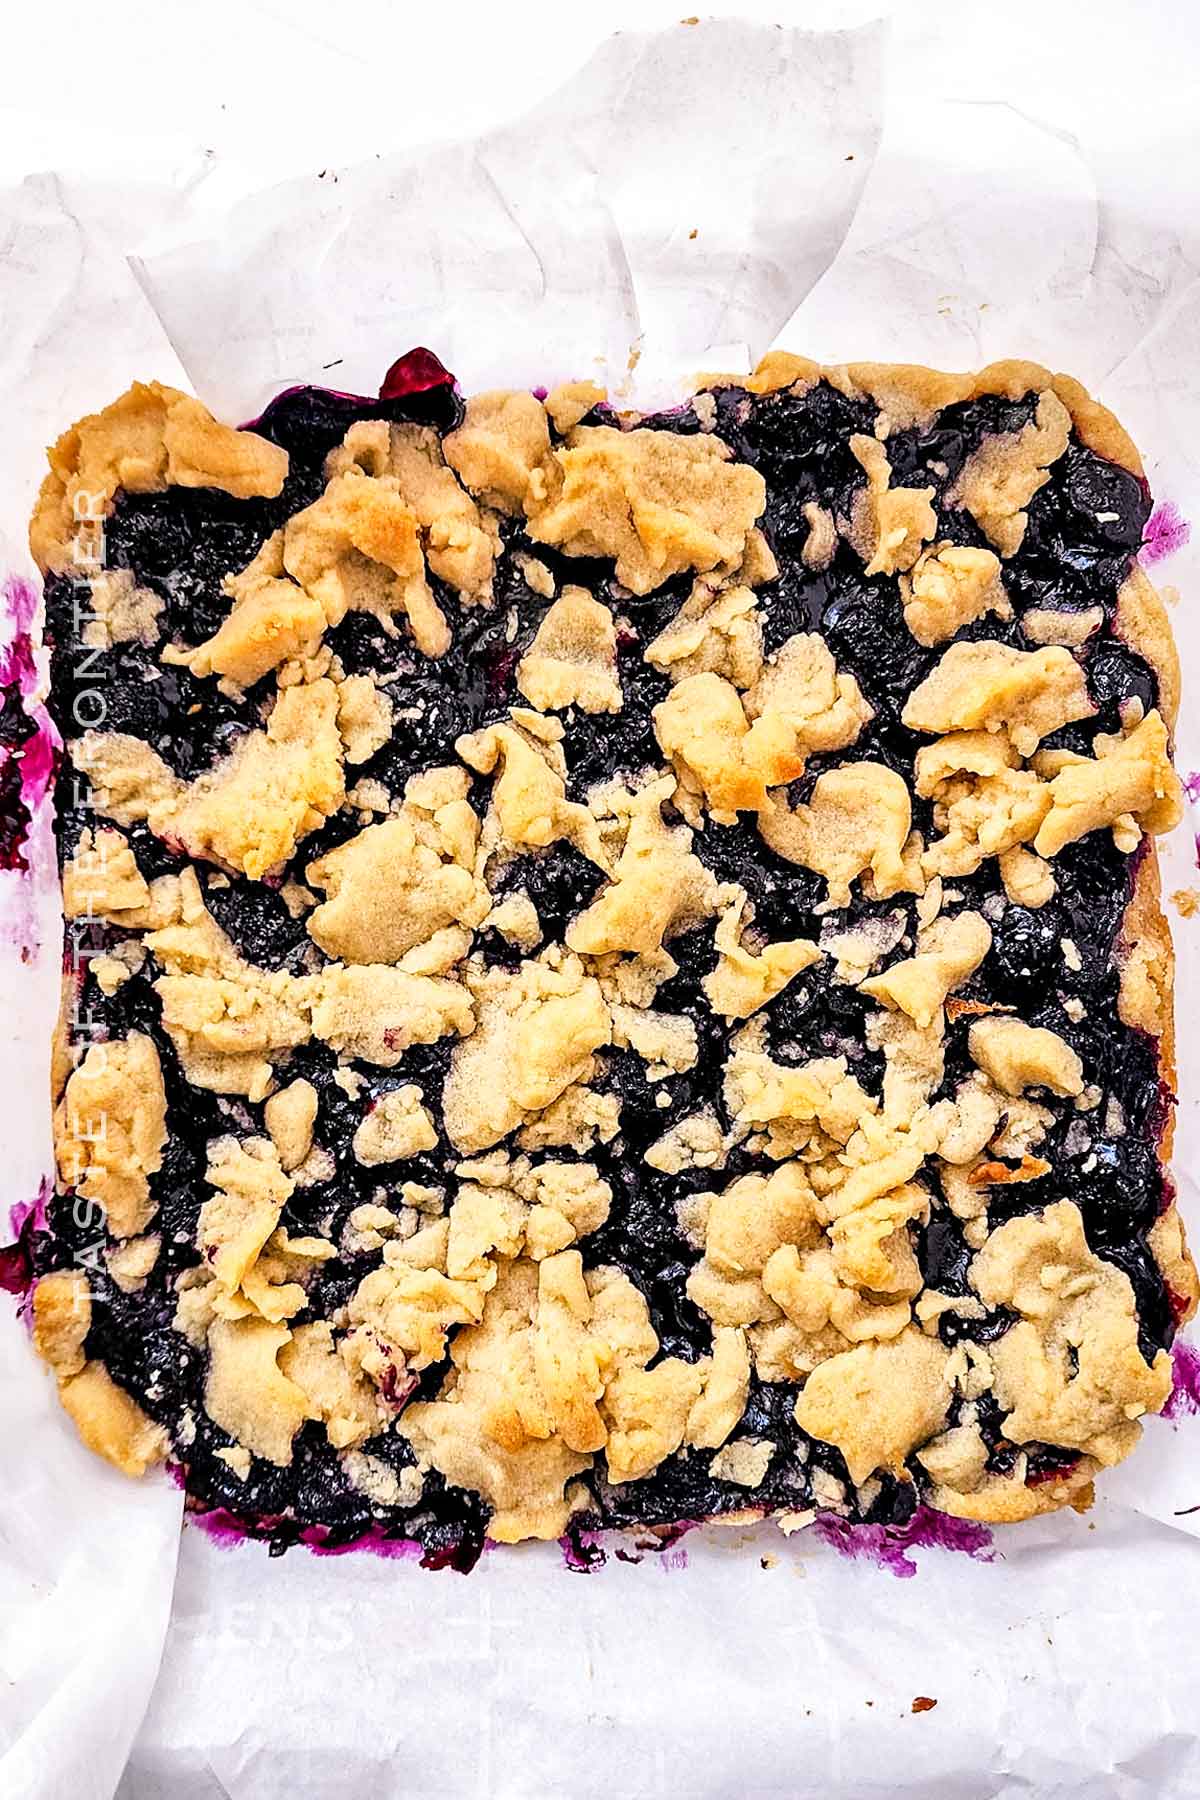 baked bar recipe with blueberry filling